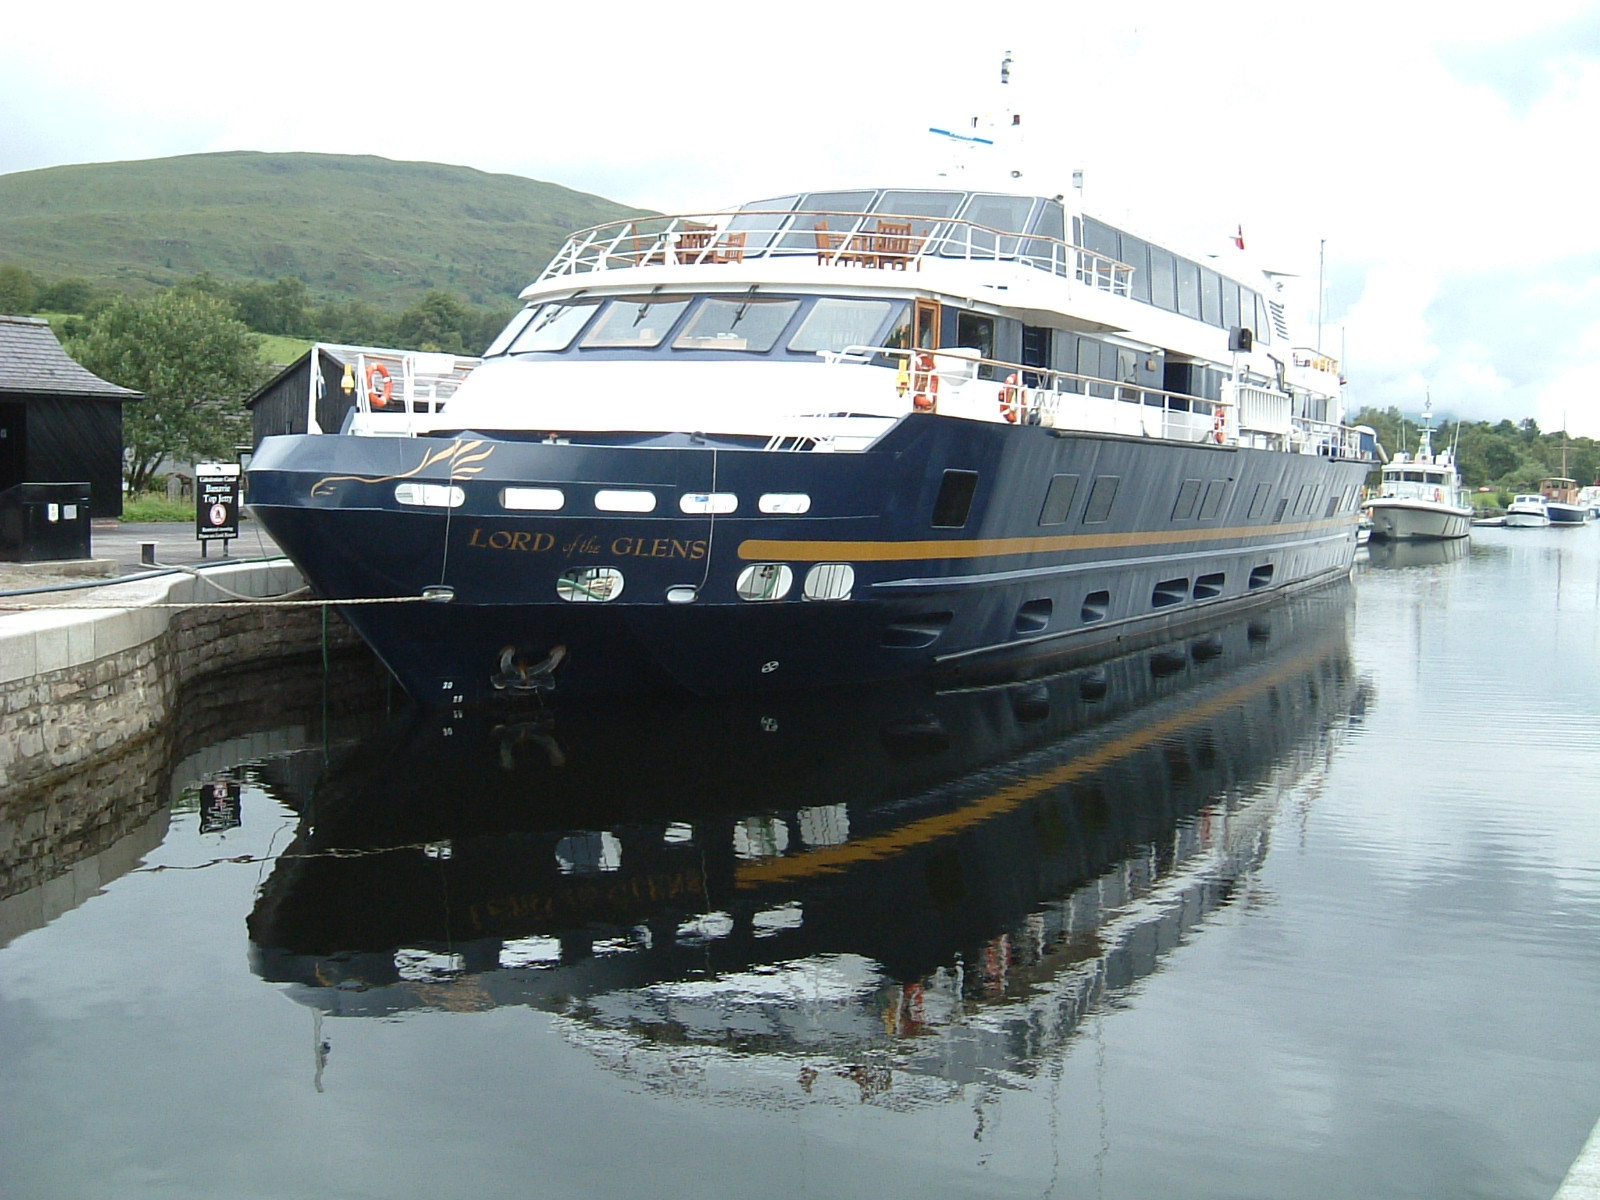 A big boat on the Caledonian Canal